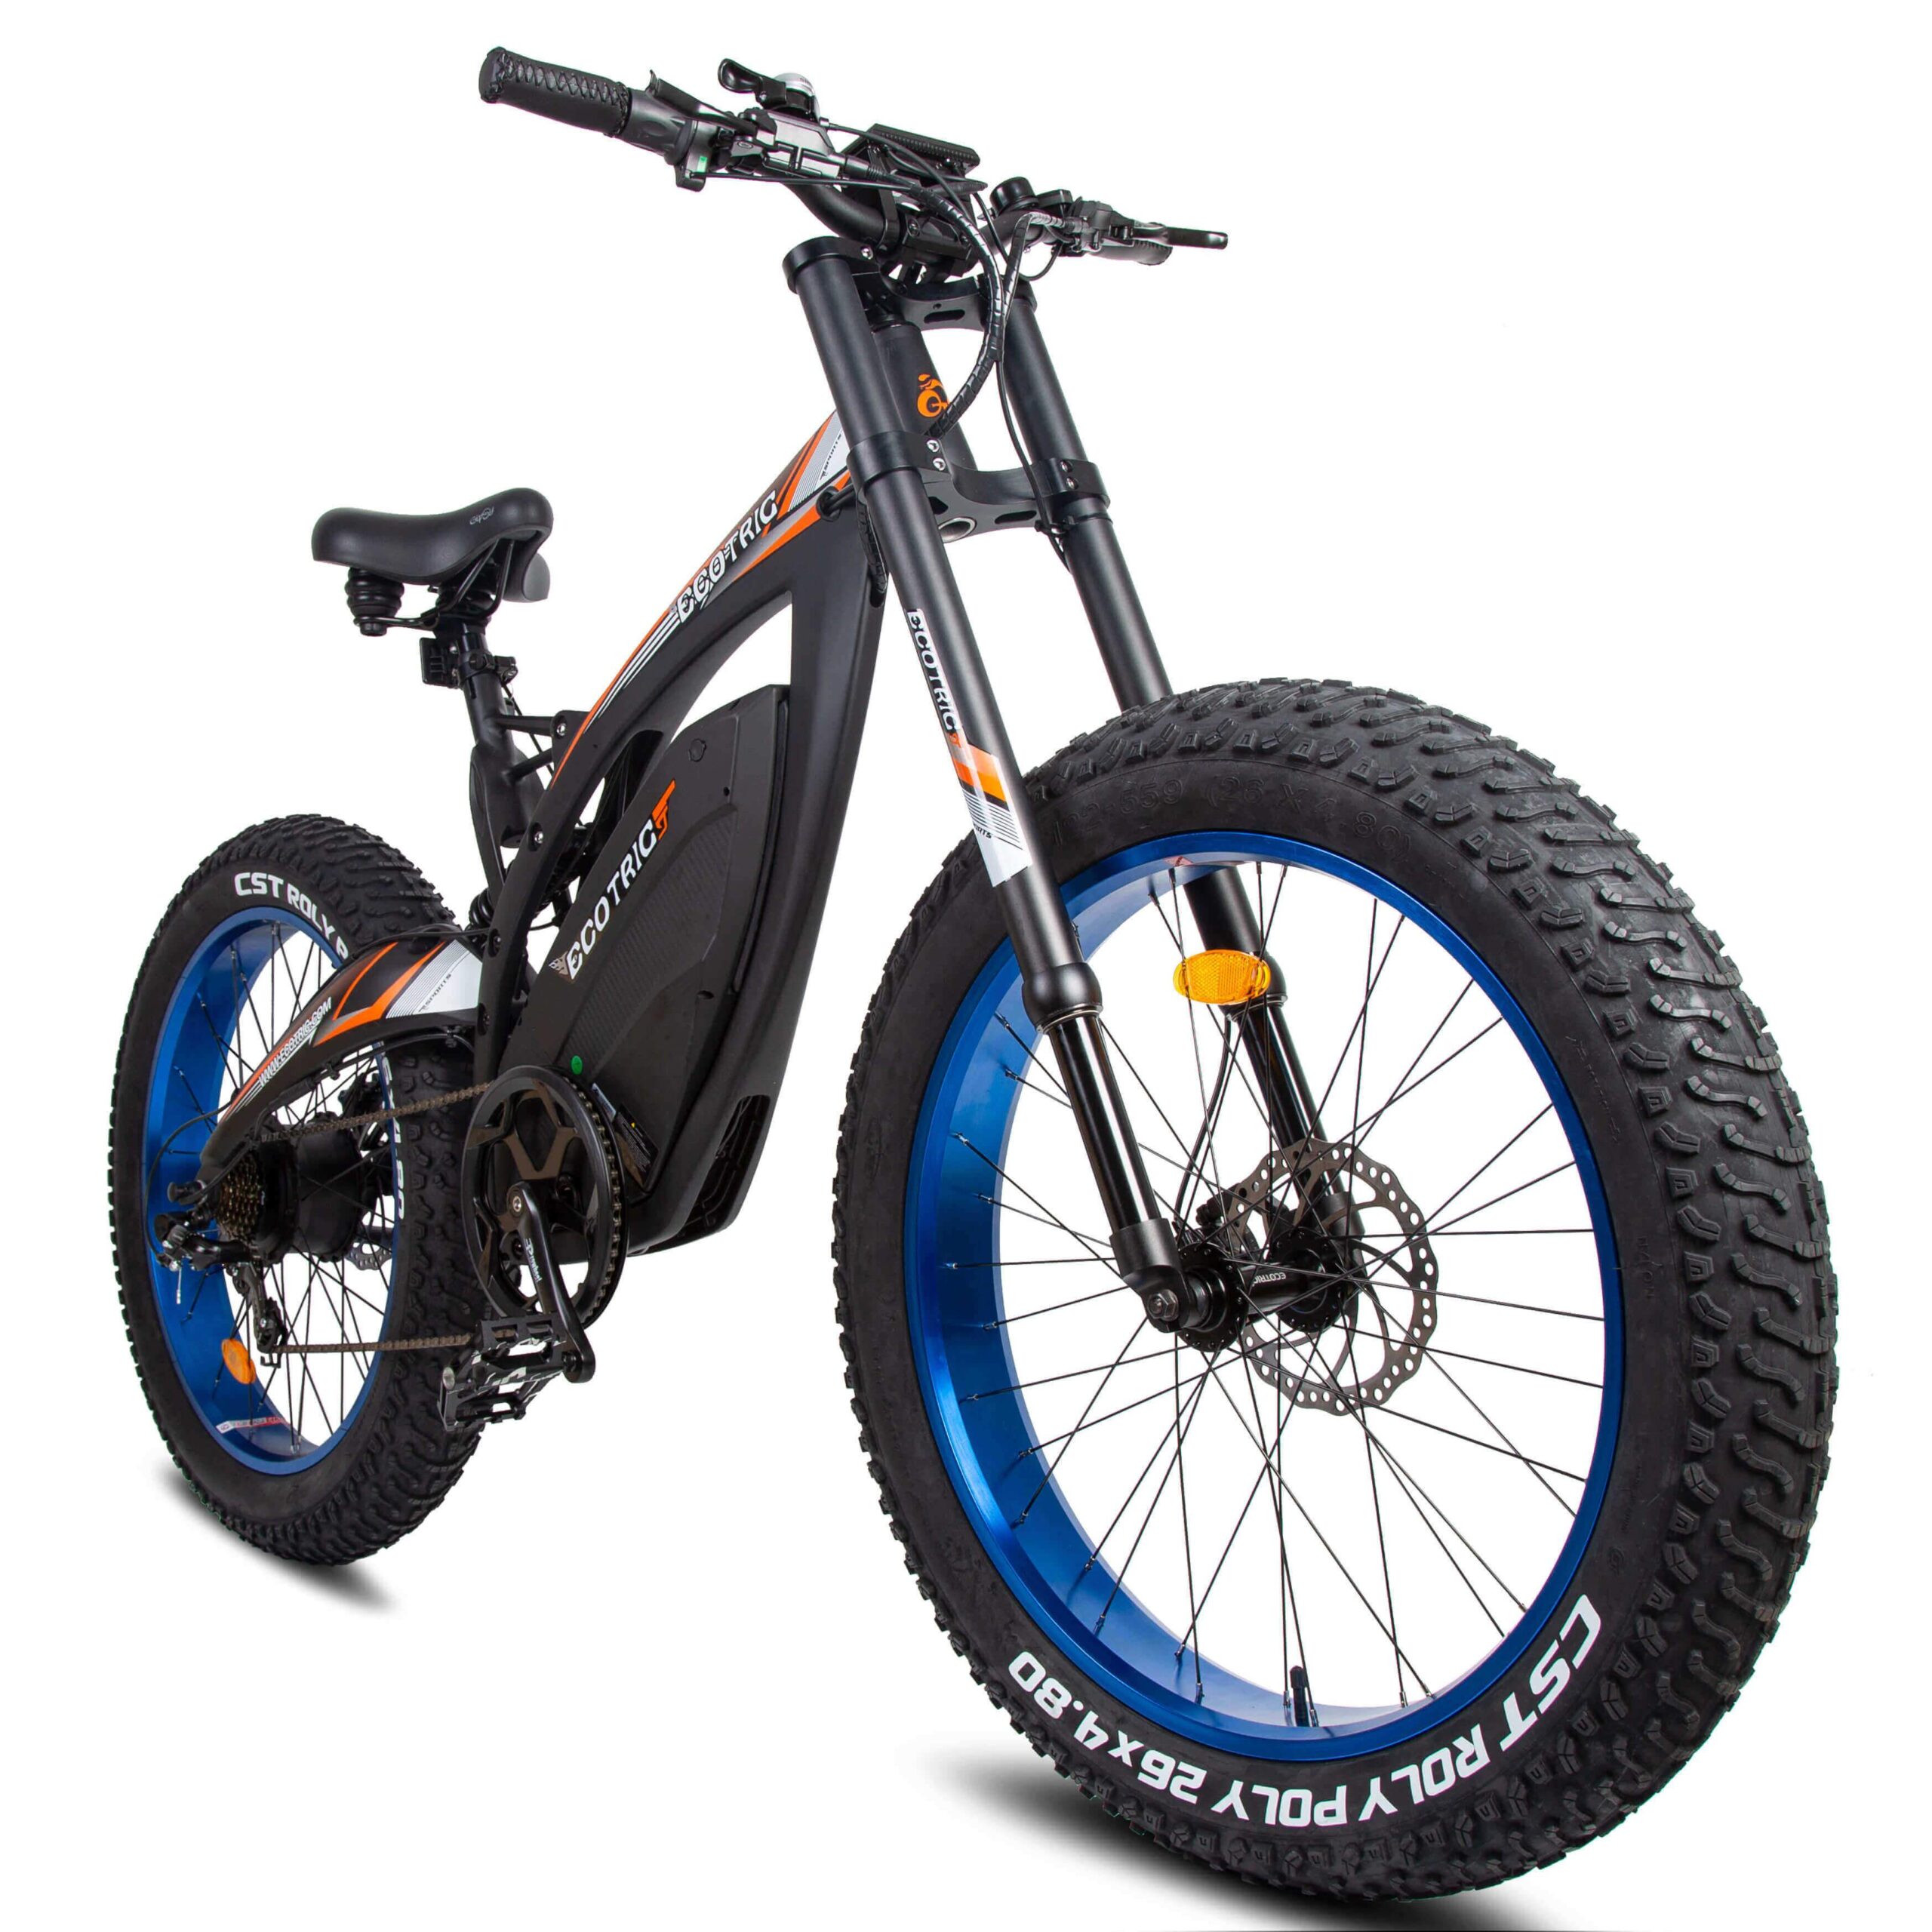 Ecotric Bison Big Fat Tire 1000w 48v 17.5Ah Electric Mountain Bike